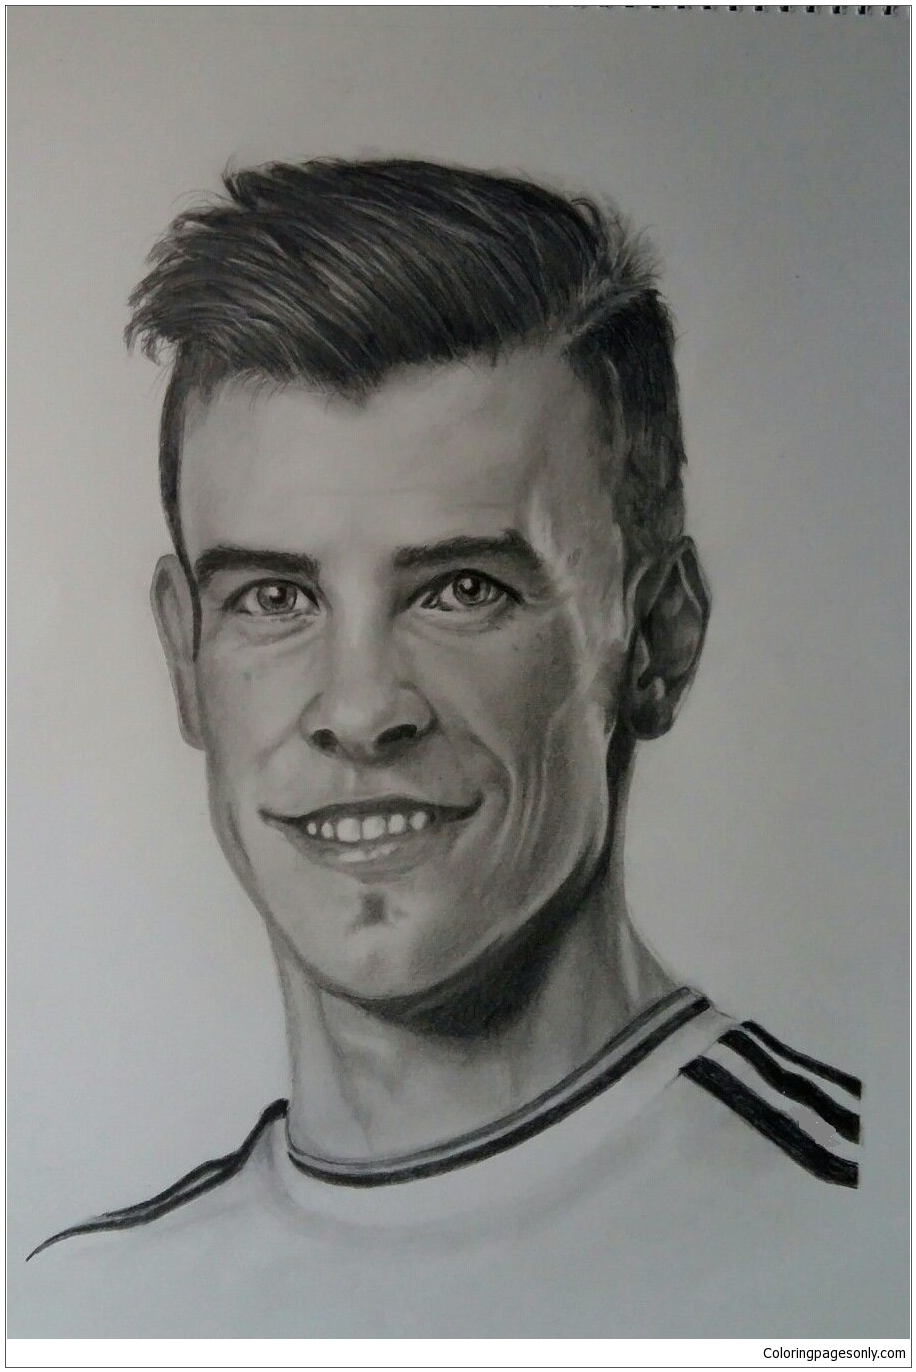 Download Gareth Bale-image 5 Coloring Page - Free Coloring Pages Online